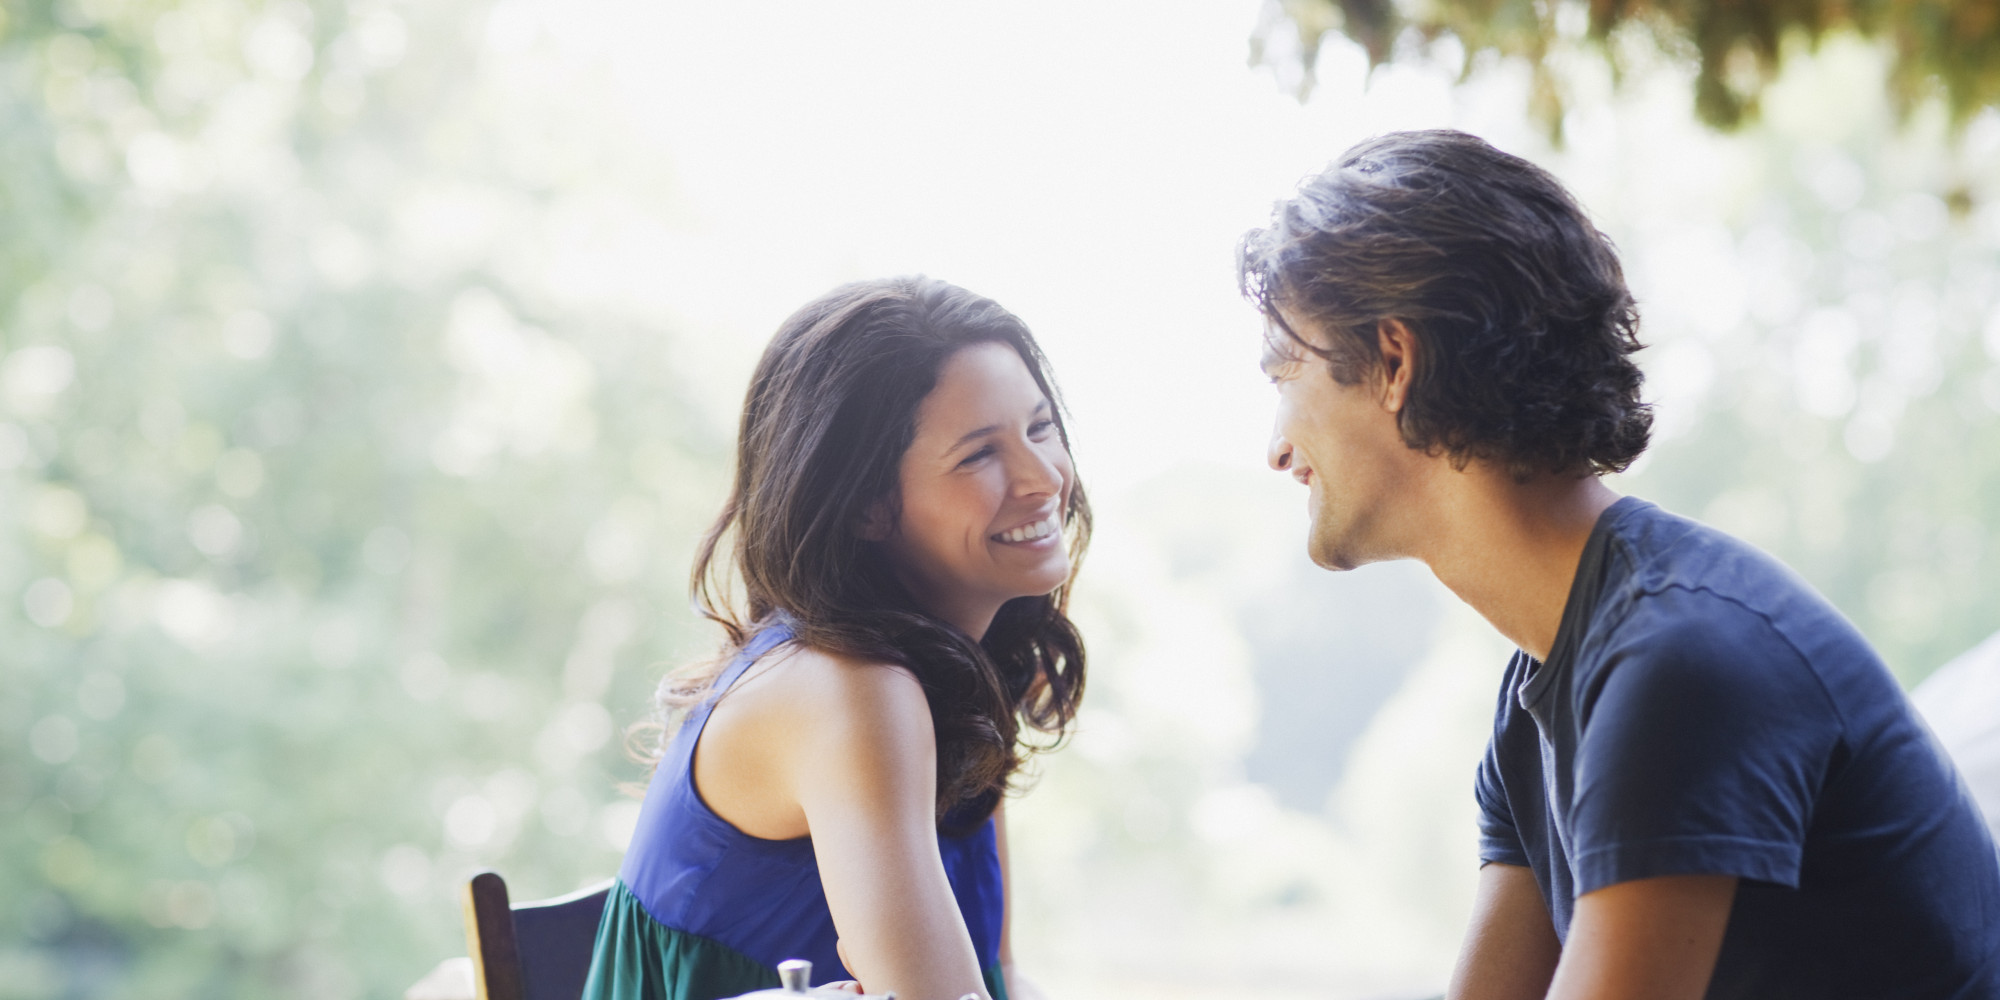 Is It Okay To Start A Relationship During Addiction Treatment